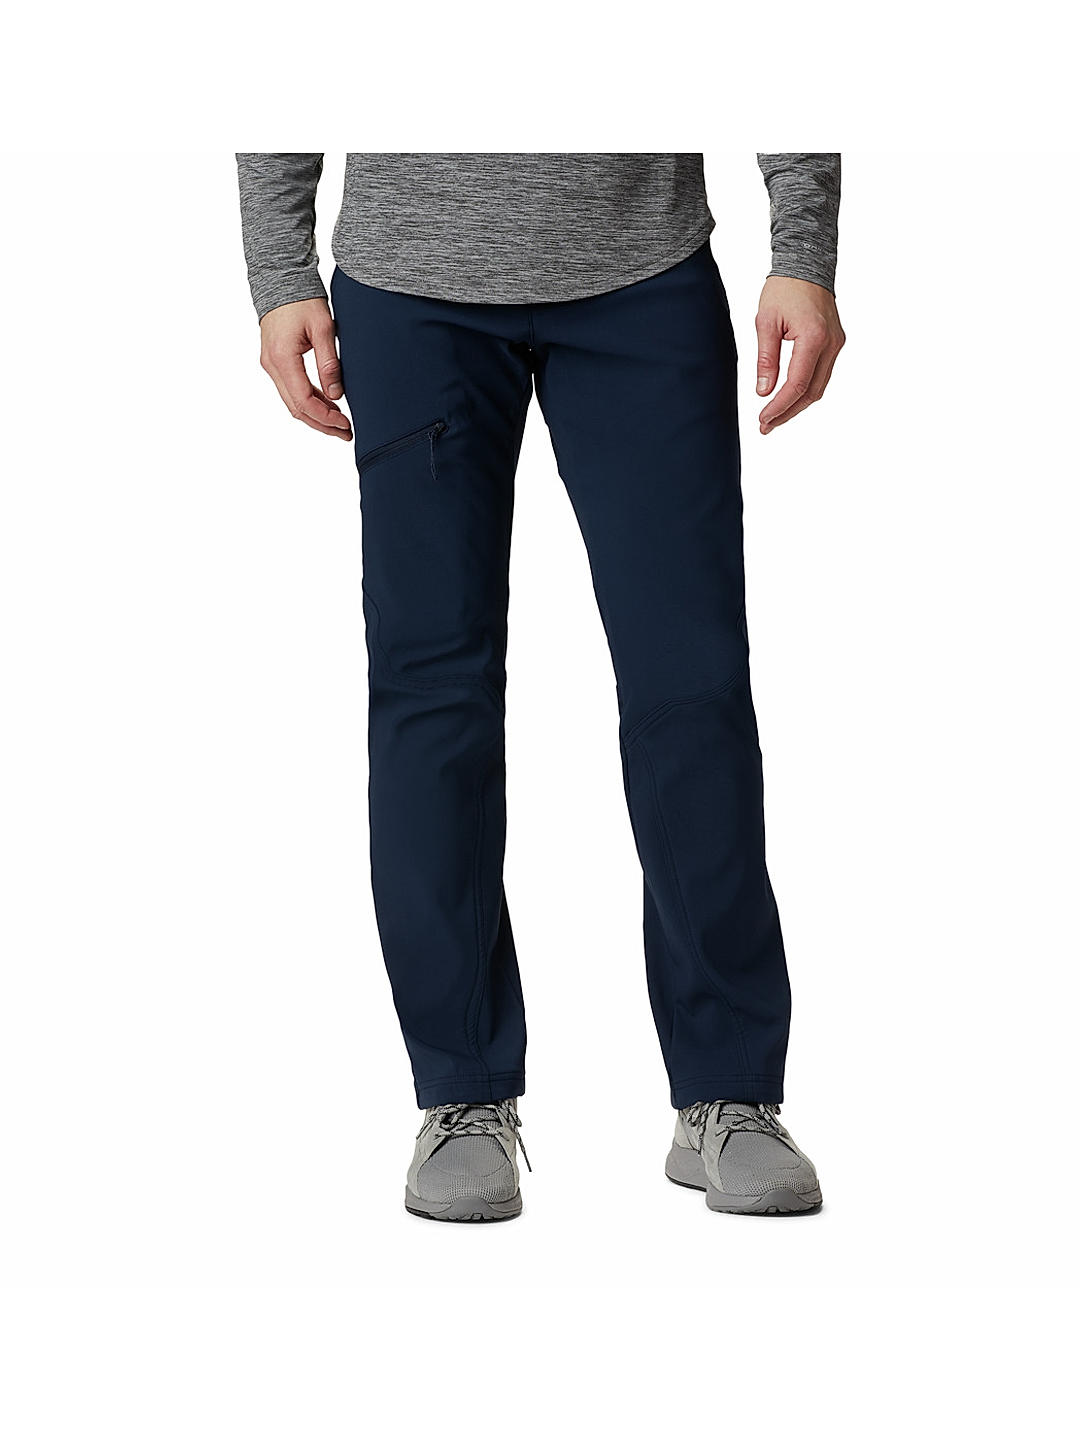 Buy Triple Canyon Pant for Men and Women Online at Columbia